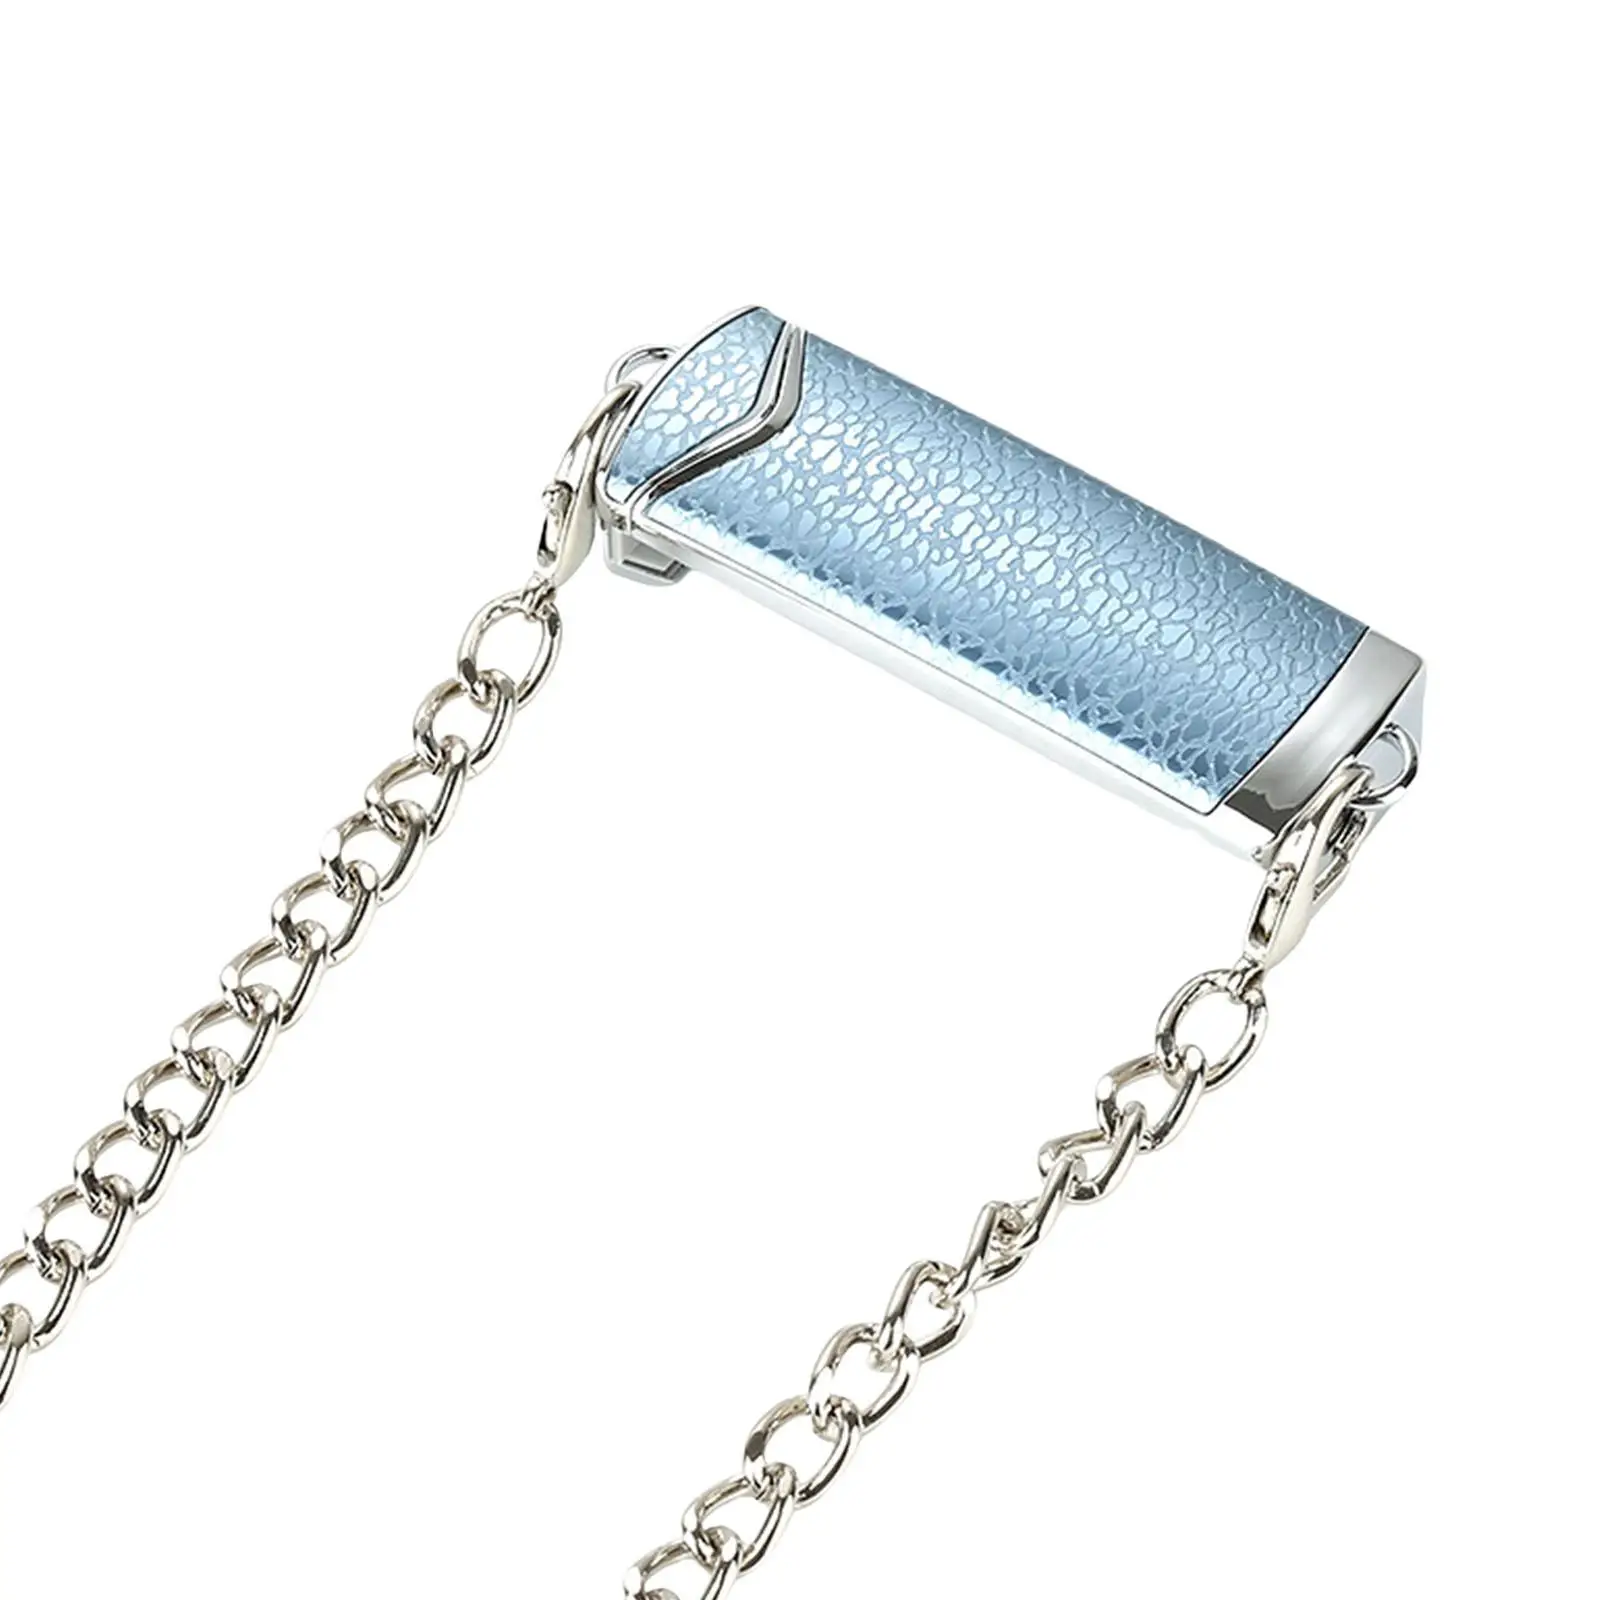 Mobile Phone Metal Chain Back Clip, Comfortable Free Your Hands Easily Accessible Portable Keep Phone Secure